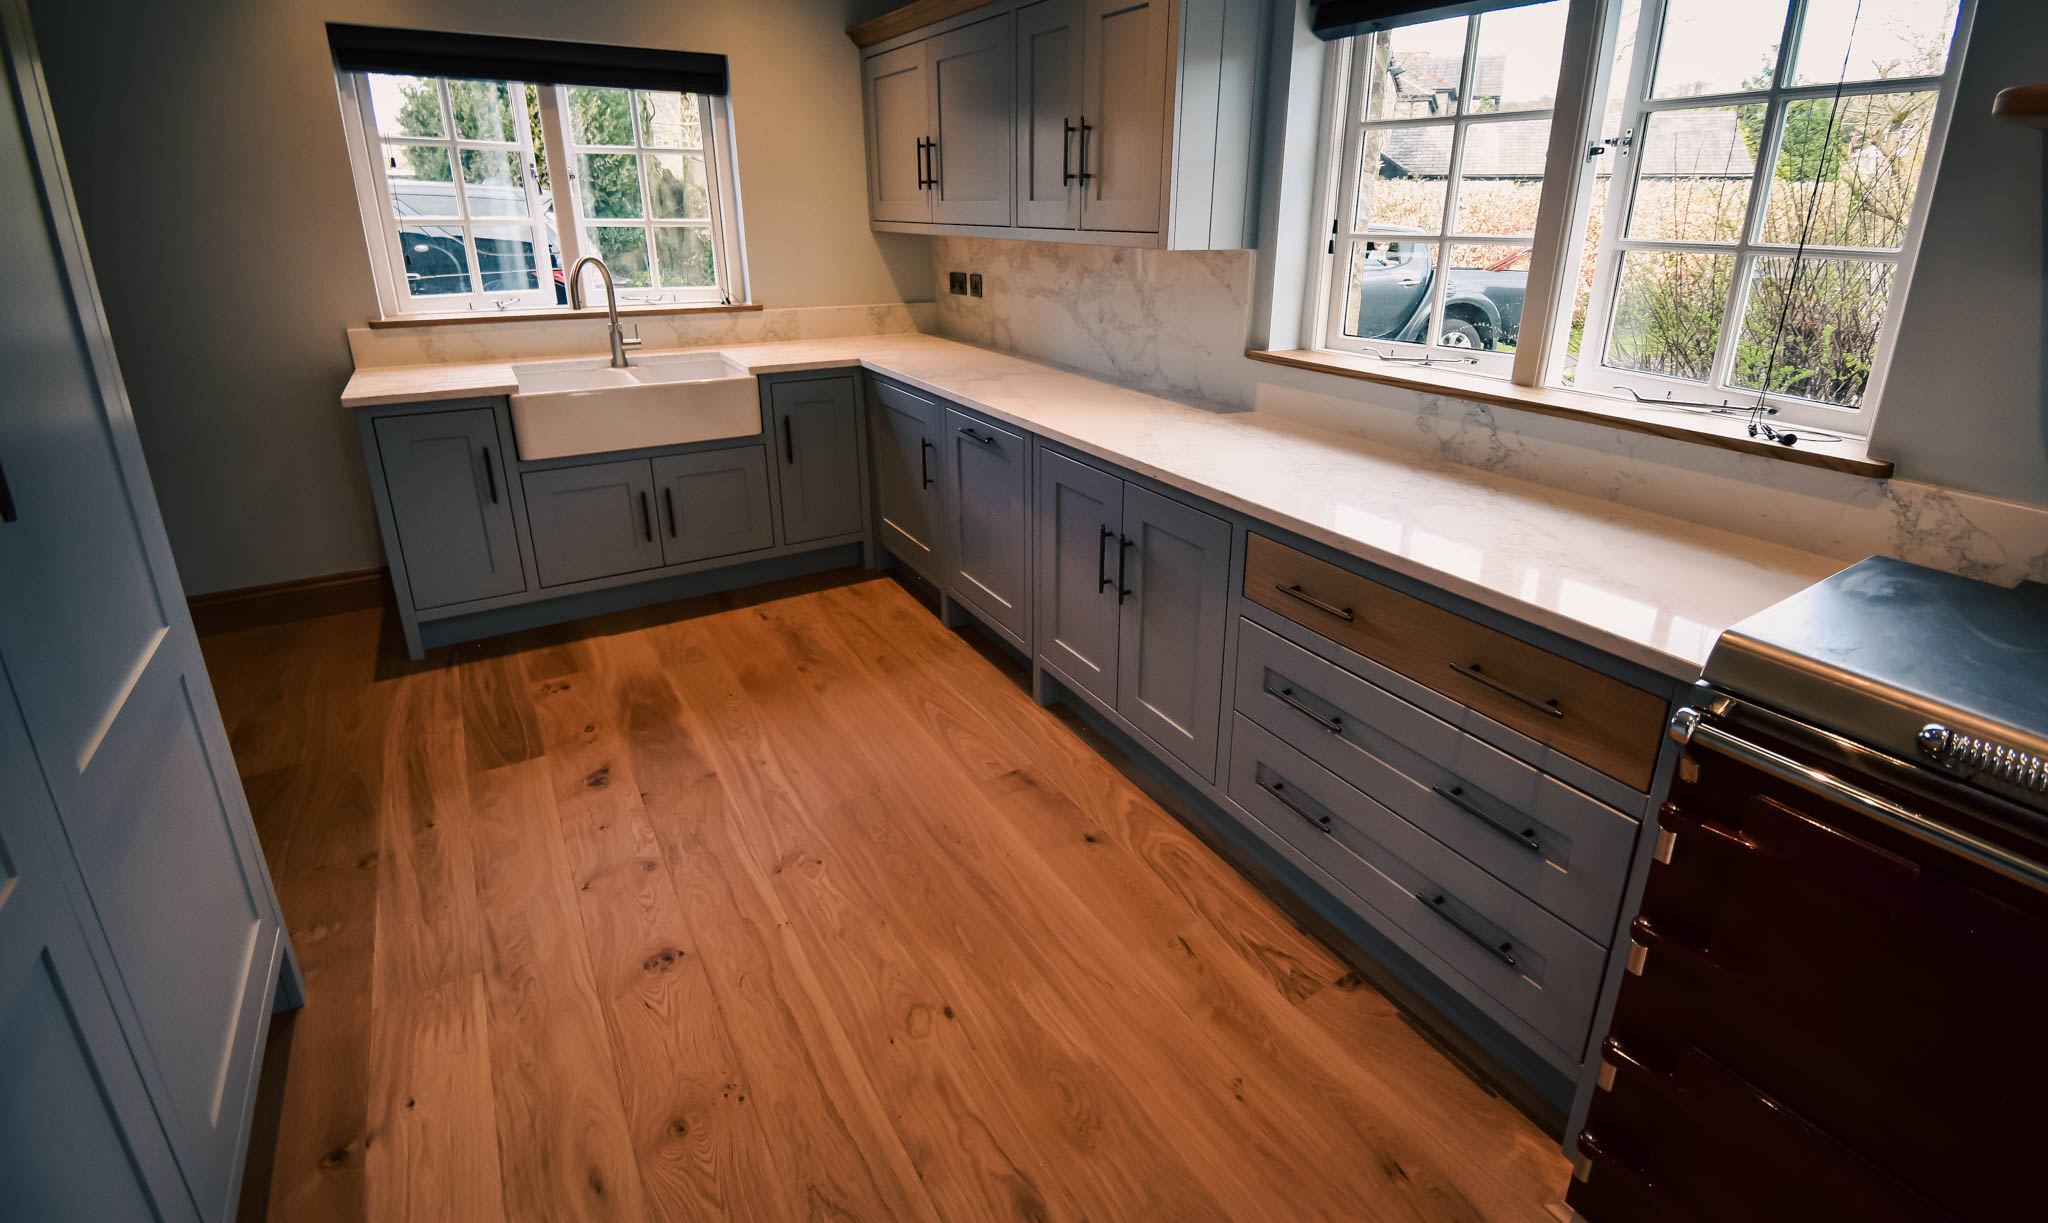 Made to measure joinery Skipton. Handmade kitchens with bespoke design service. Property Renovations North Yorkshire